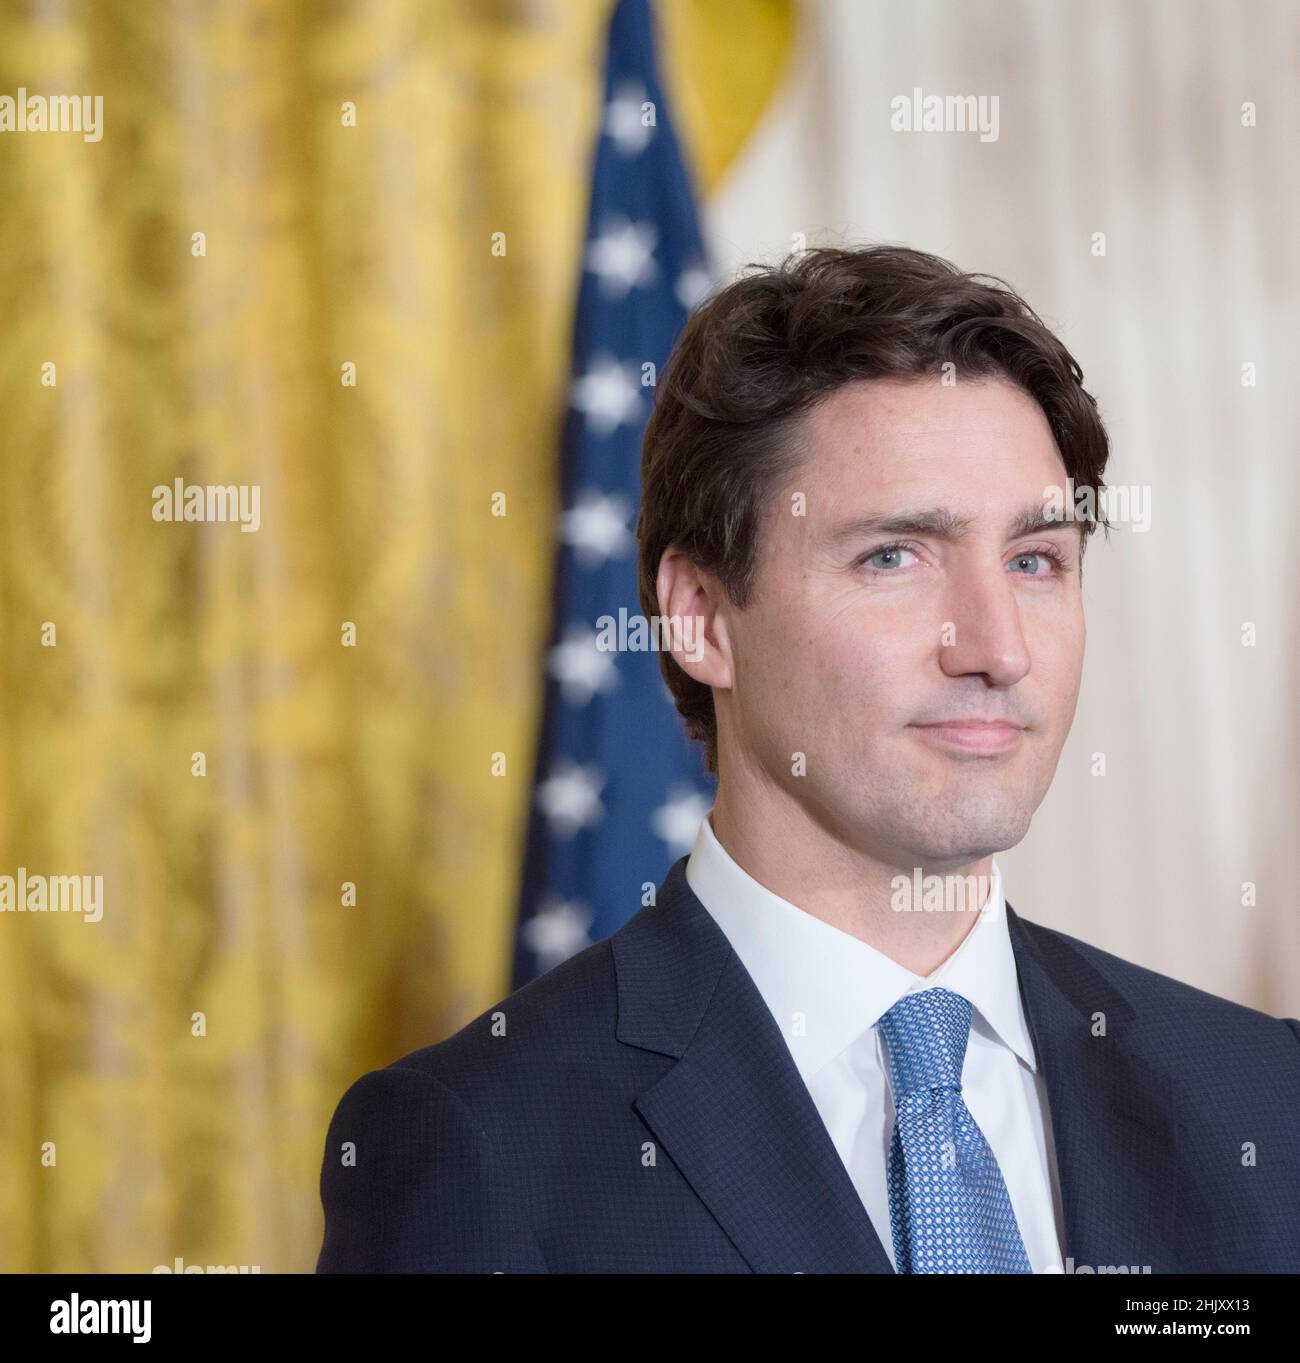 **FILE PHOTO** Canadian Prime Minister Justin Trudeau Tests Positive for Covid-19. February 13, 2017, Washington DC, USA: Prime Minister Justin Trudeau and President Donald J Trump hold a joint press conference in the East Room of the White House in Washington DC. Patsy Lynch/MediaPunch Stock Photo